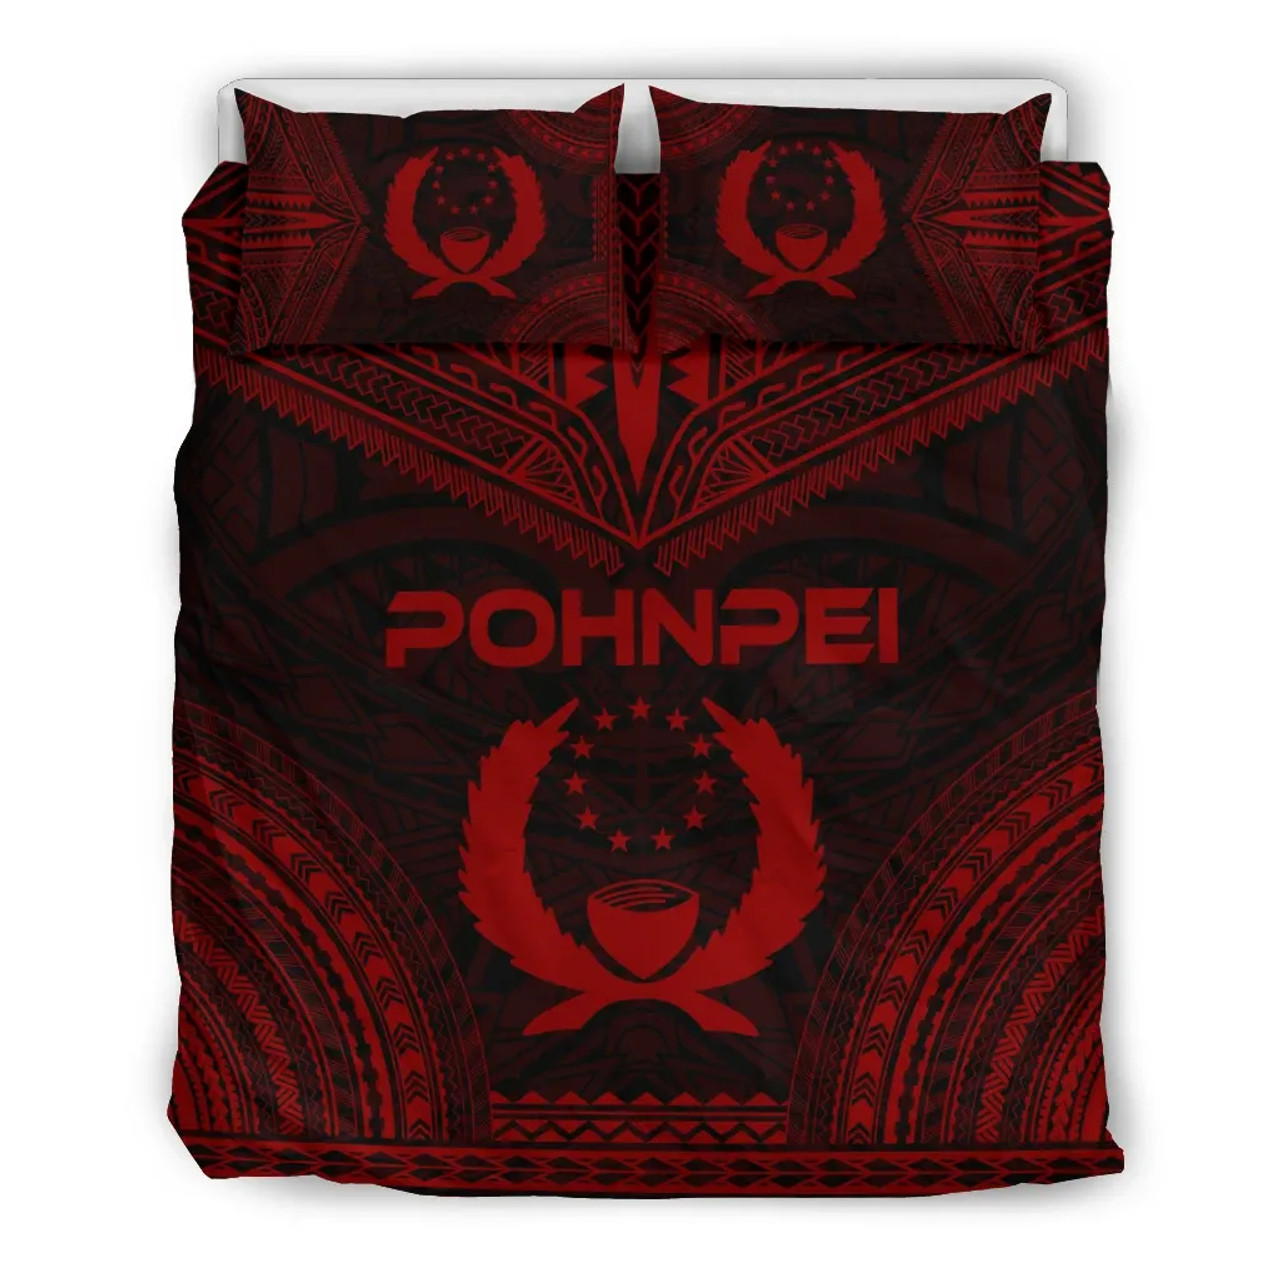 Pohnpei Polynesian Chief Duvet Cover Set - Red Version 1